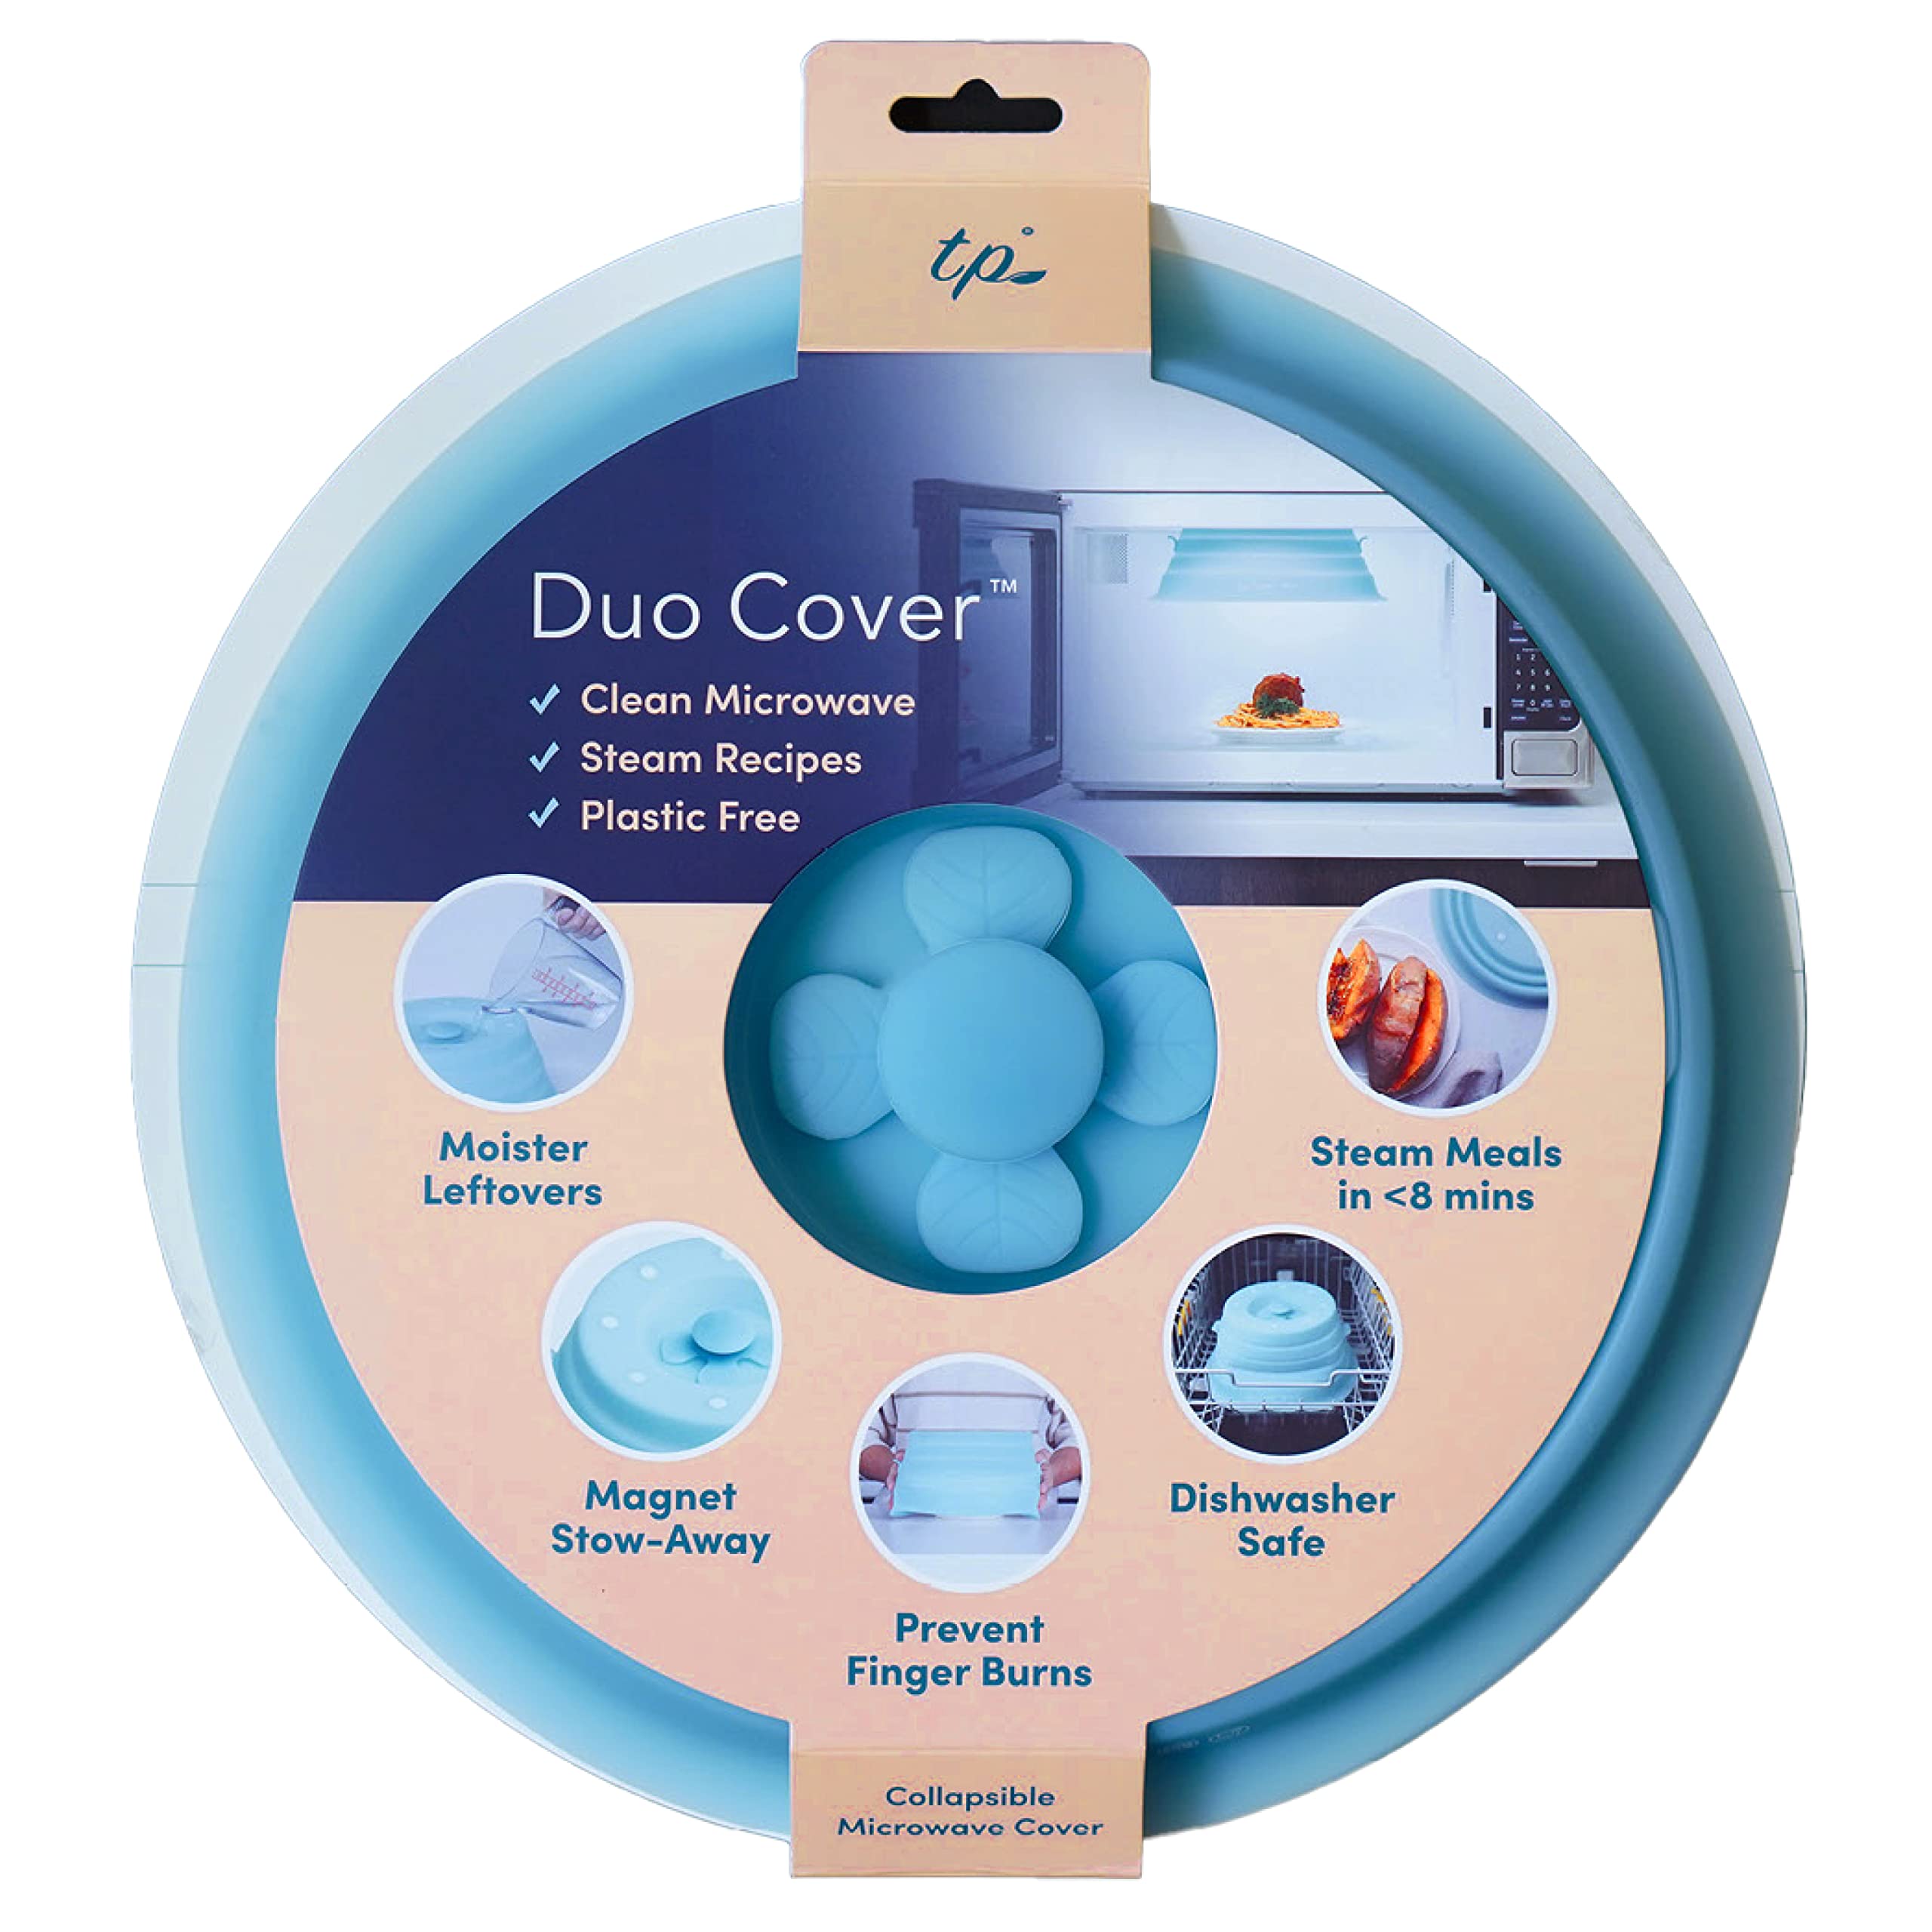 Duo Cover Microwave reviews